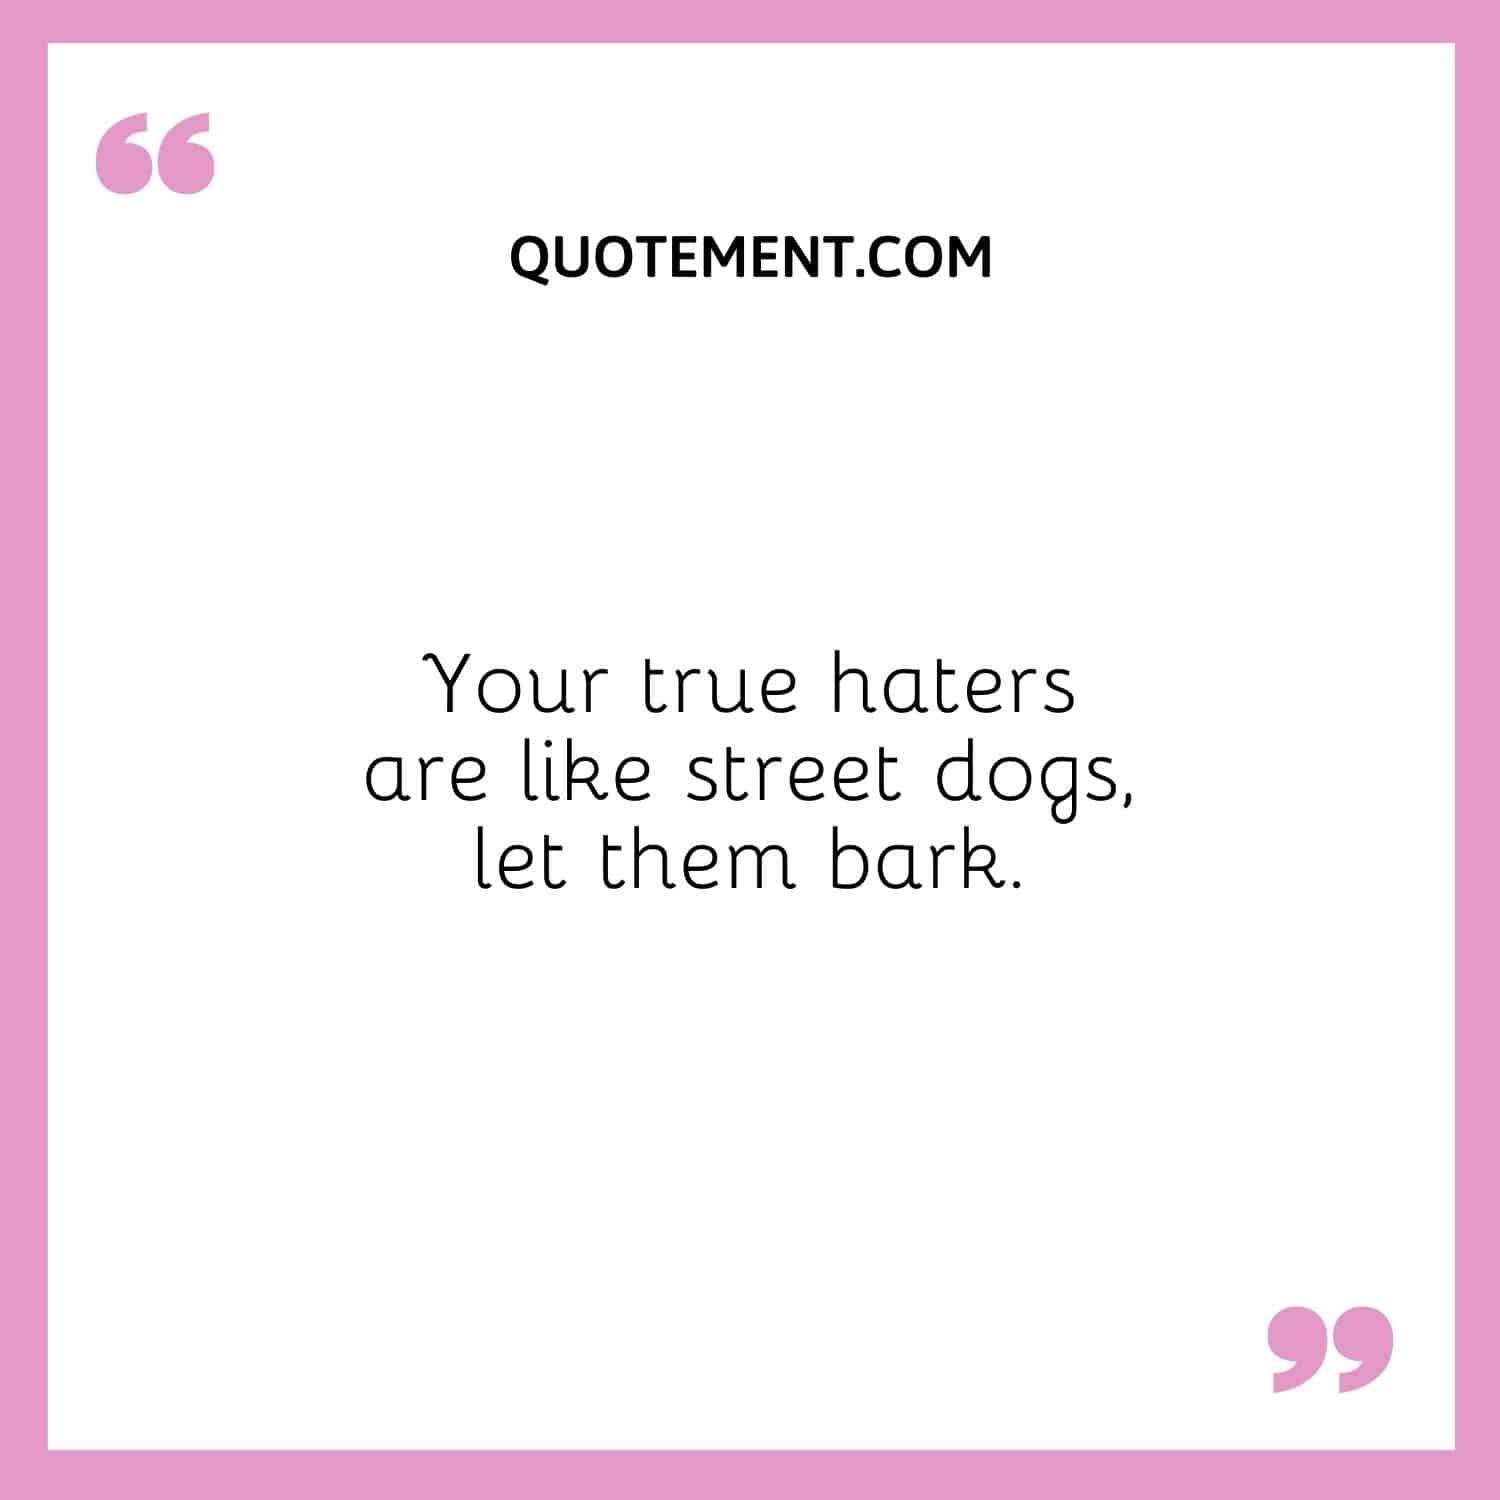 Your true haters are like street dogs, let them bark.